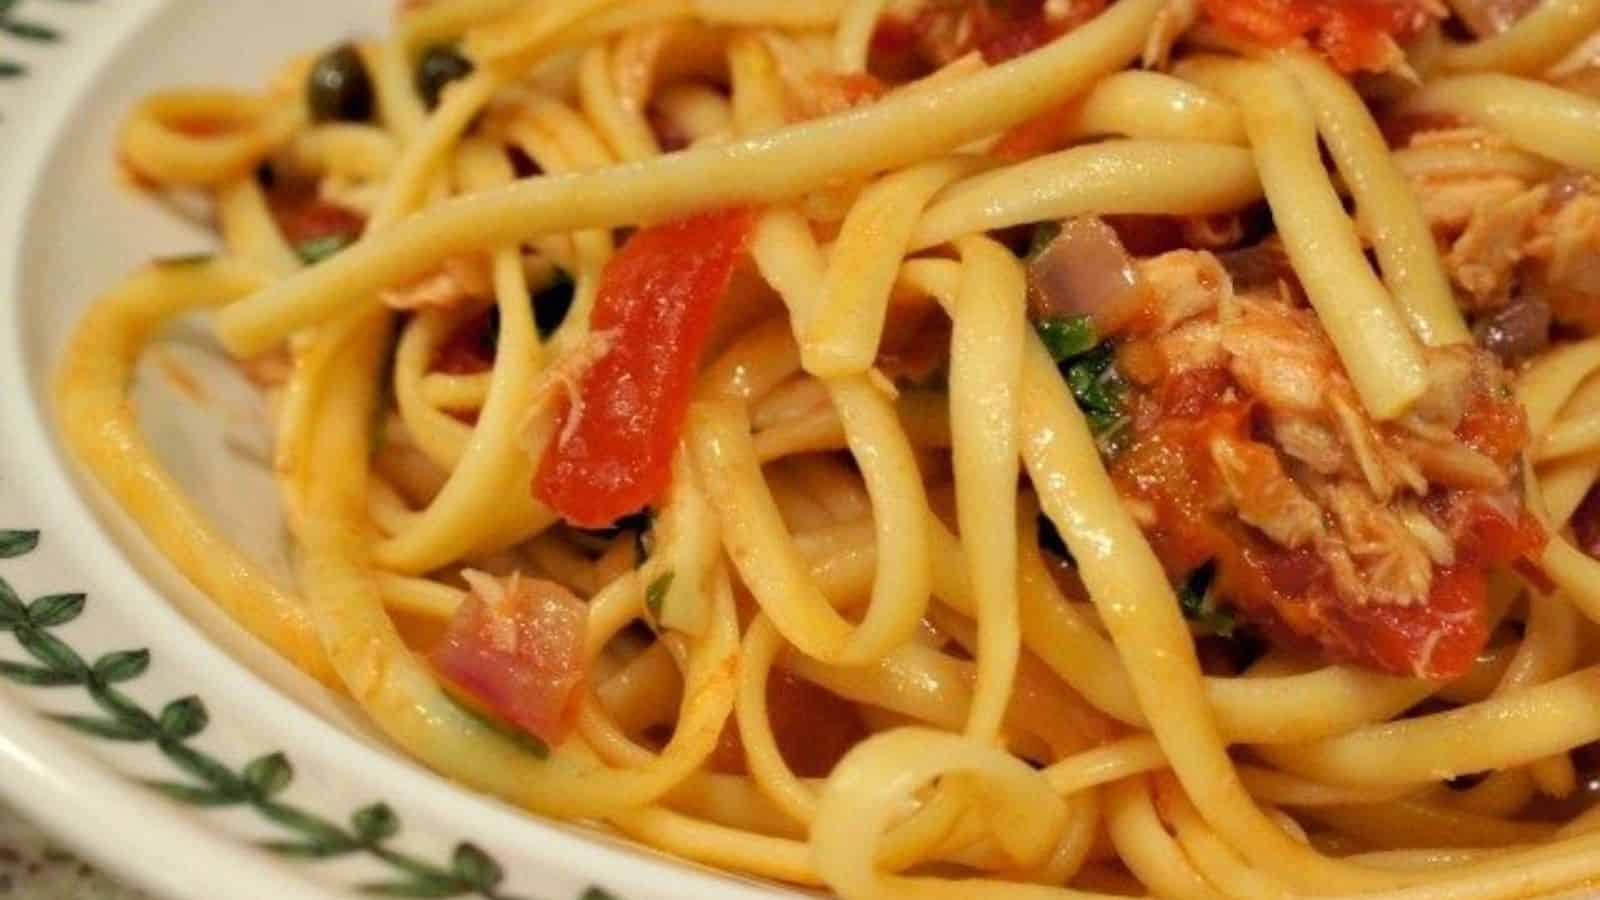 Image shows a closeup view of tuna and tomato pasta in a white patterned bowl.